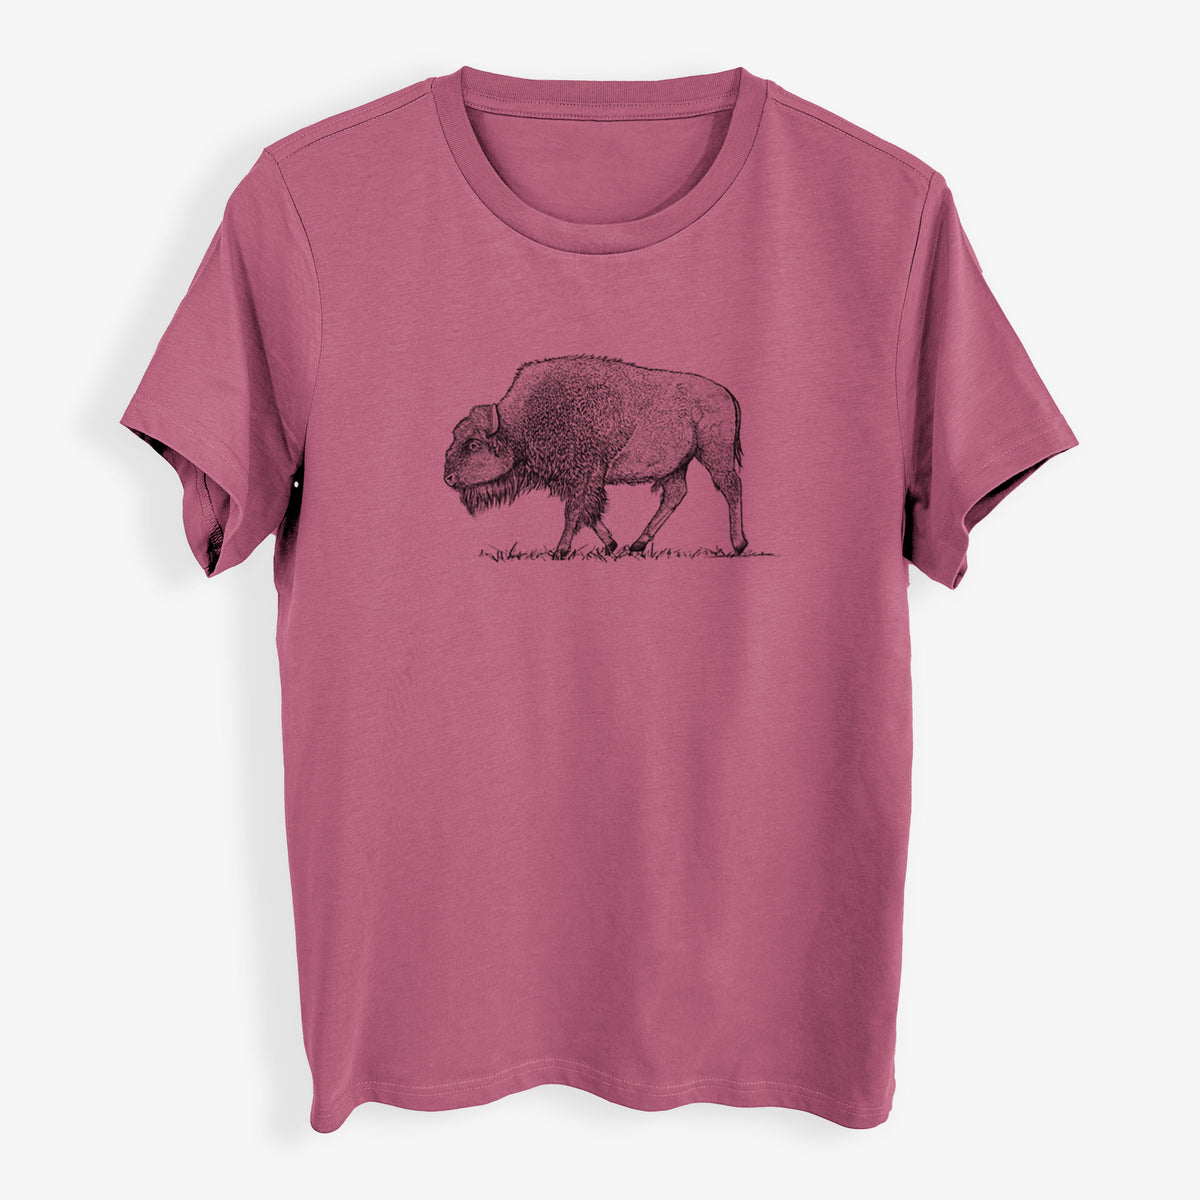 American Bison / Buffalo - Bison bison - Womens Everyday Maple Tee